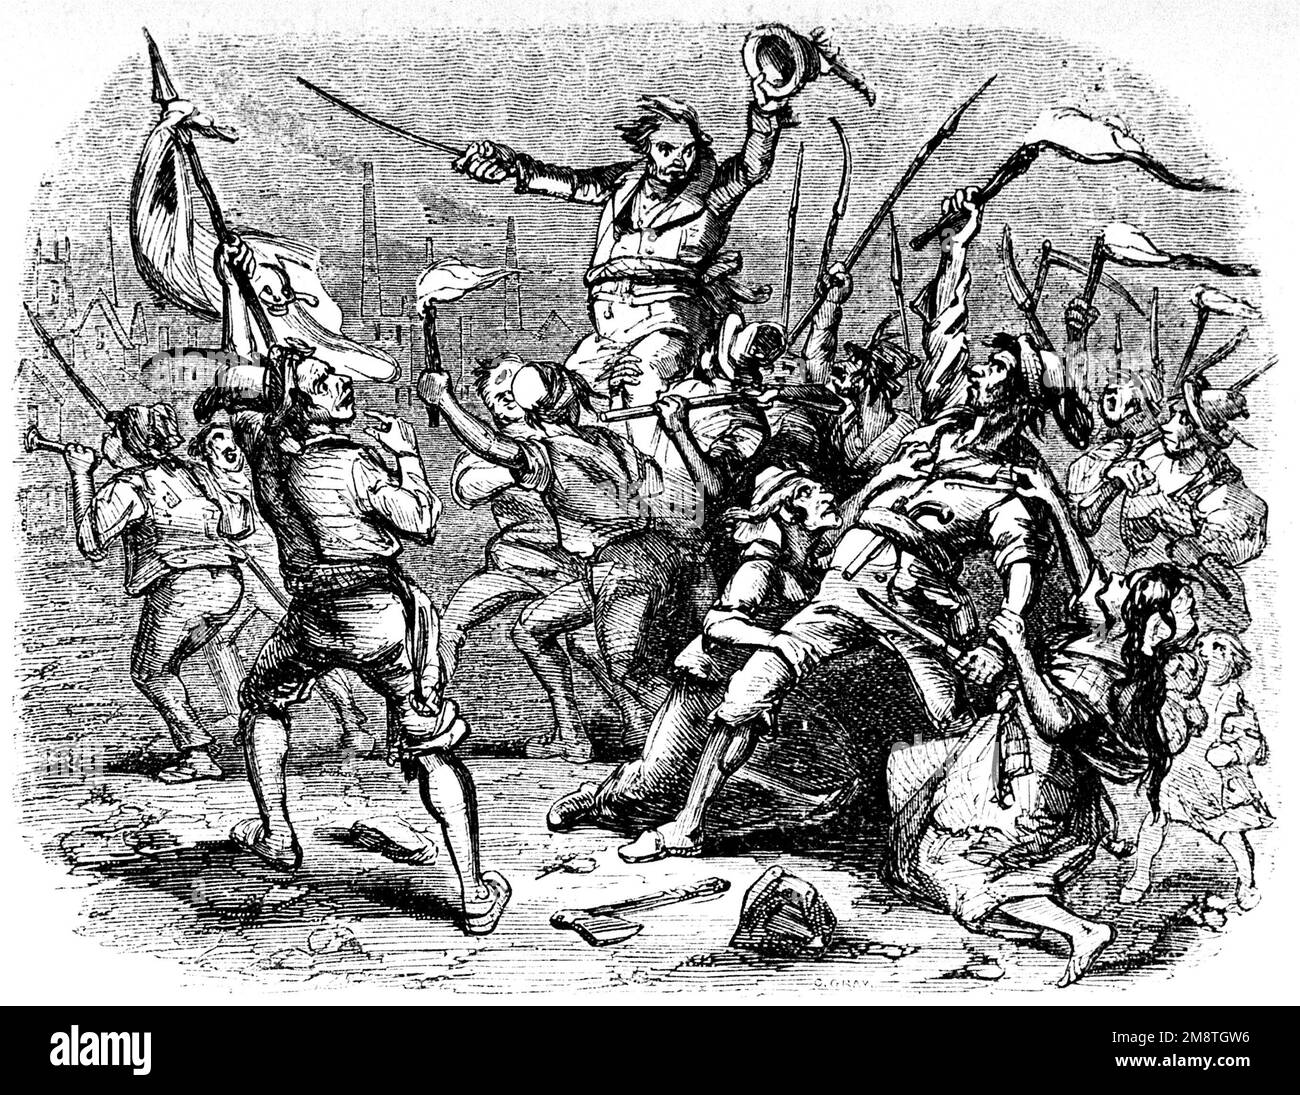 Illustration showing a rioting mob of Luddites, by Phiz (Hablot Knight Browne), 1813. Stock Photo